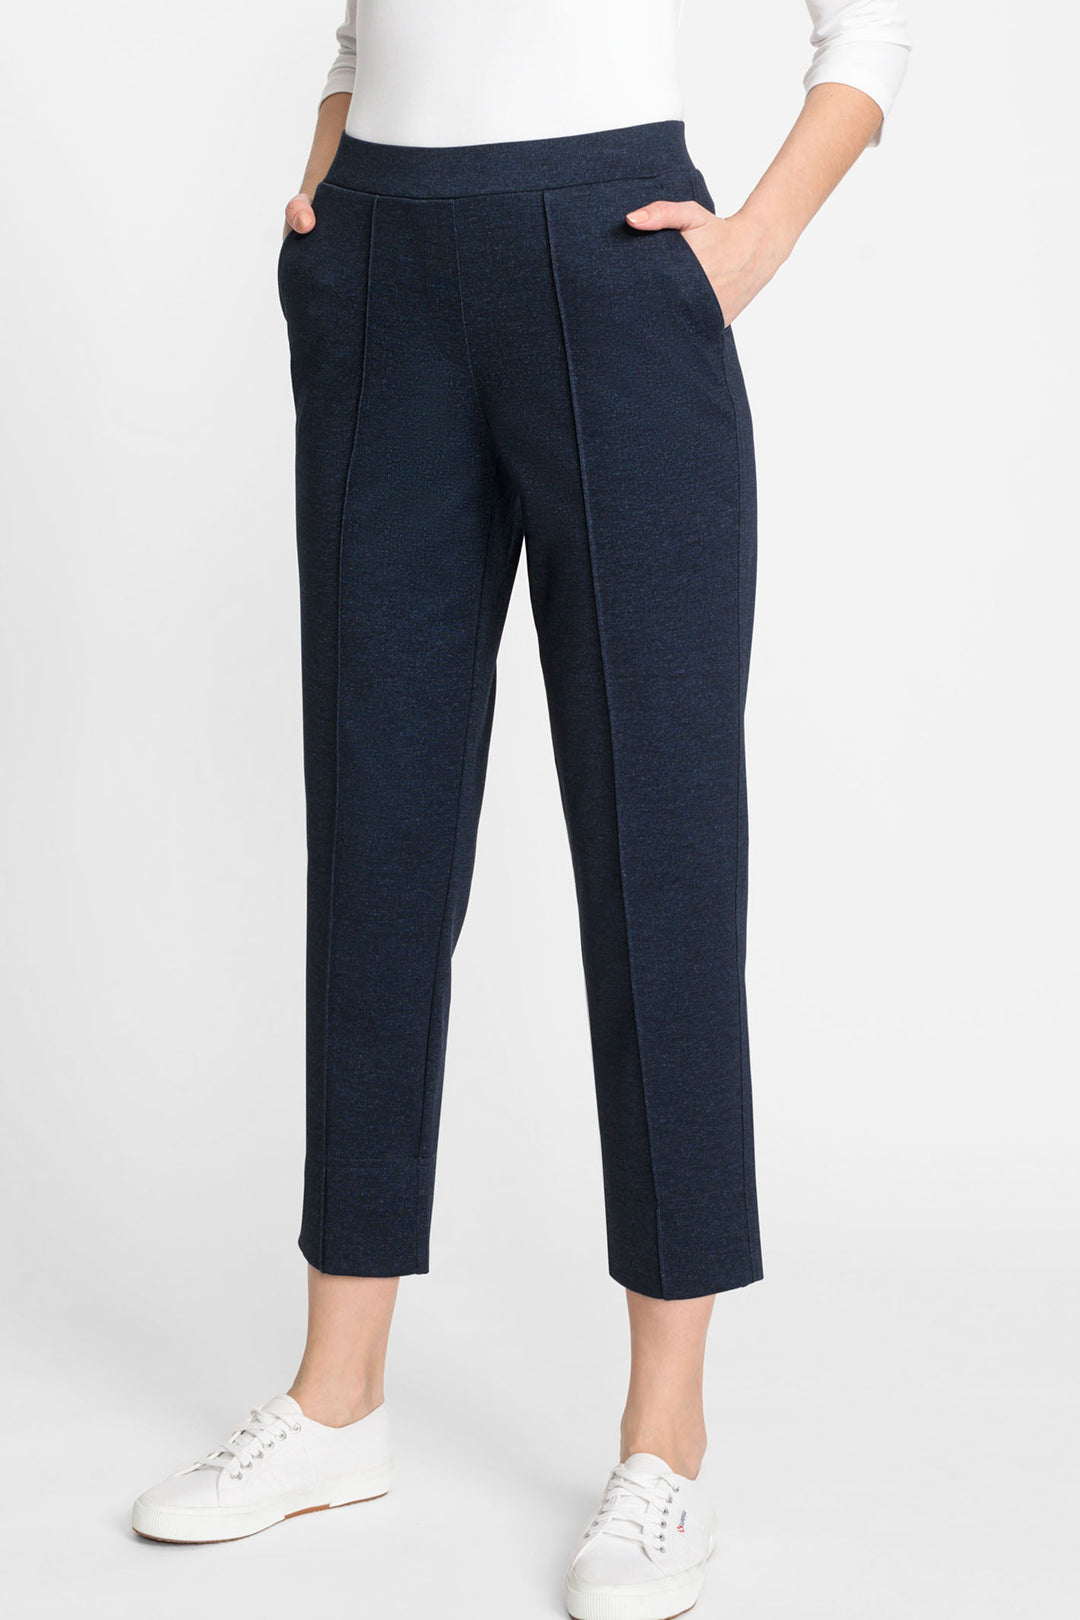 Olsen 14002057 Ink Blue Cropped Pull-On Trousers - Experience Boutique